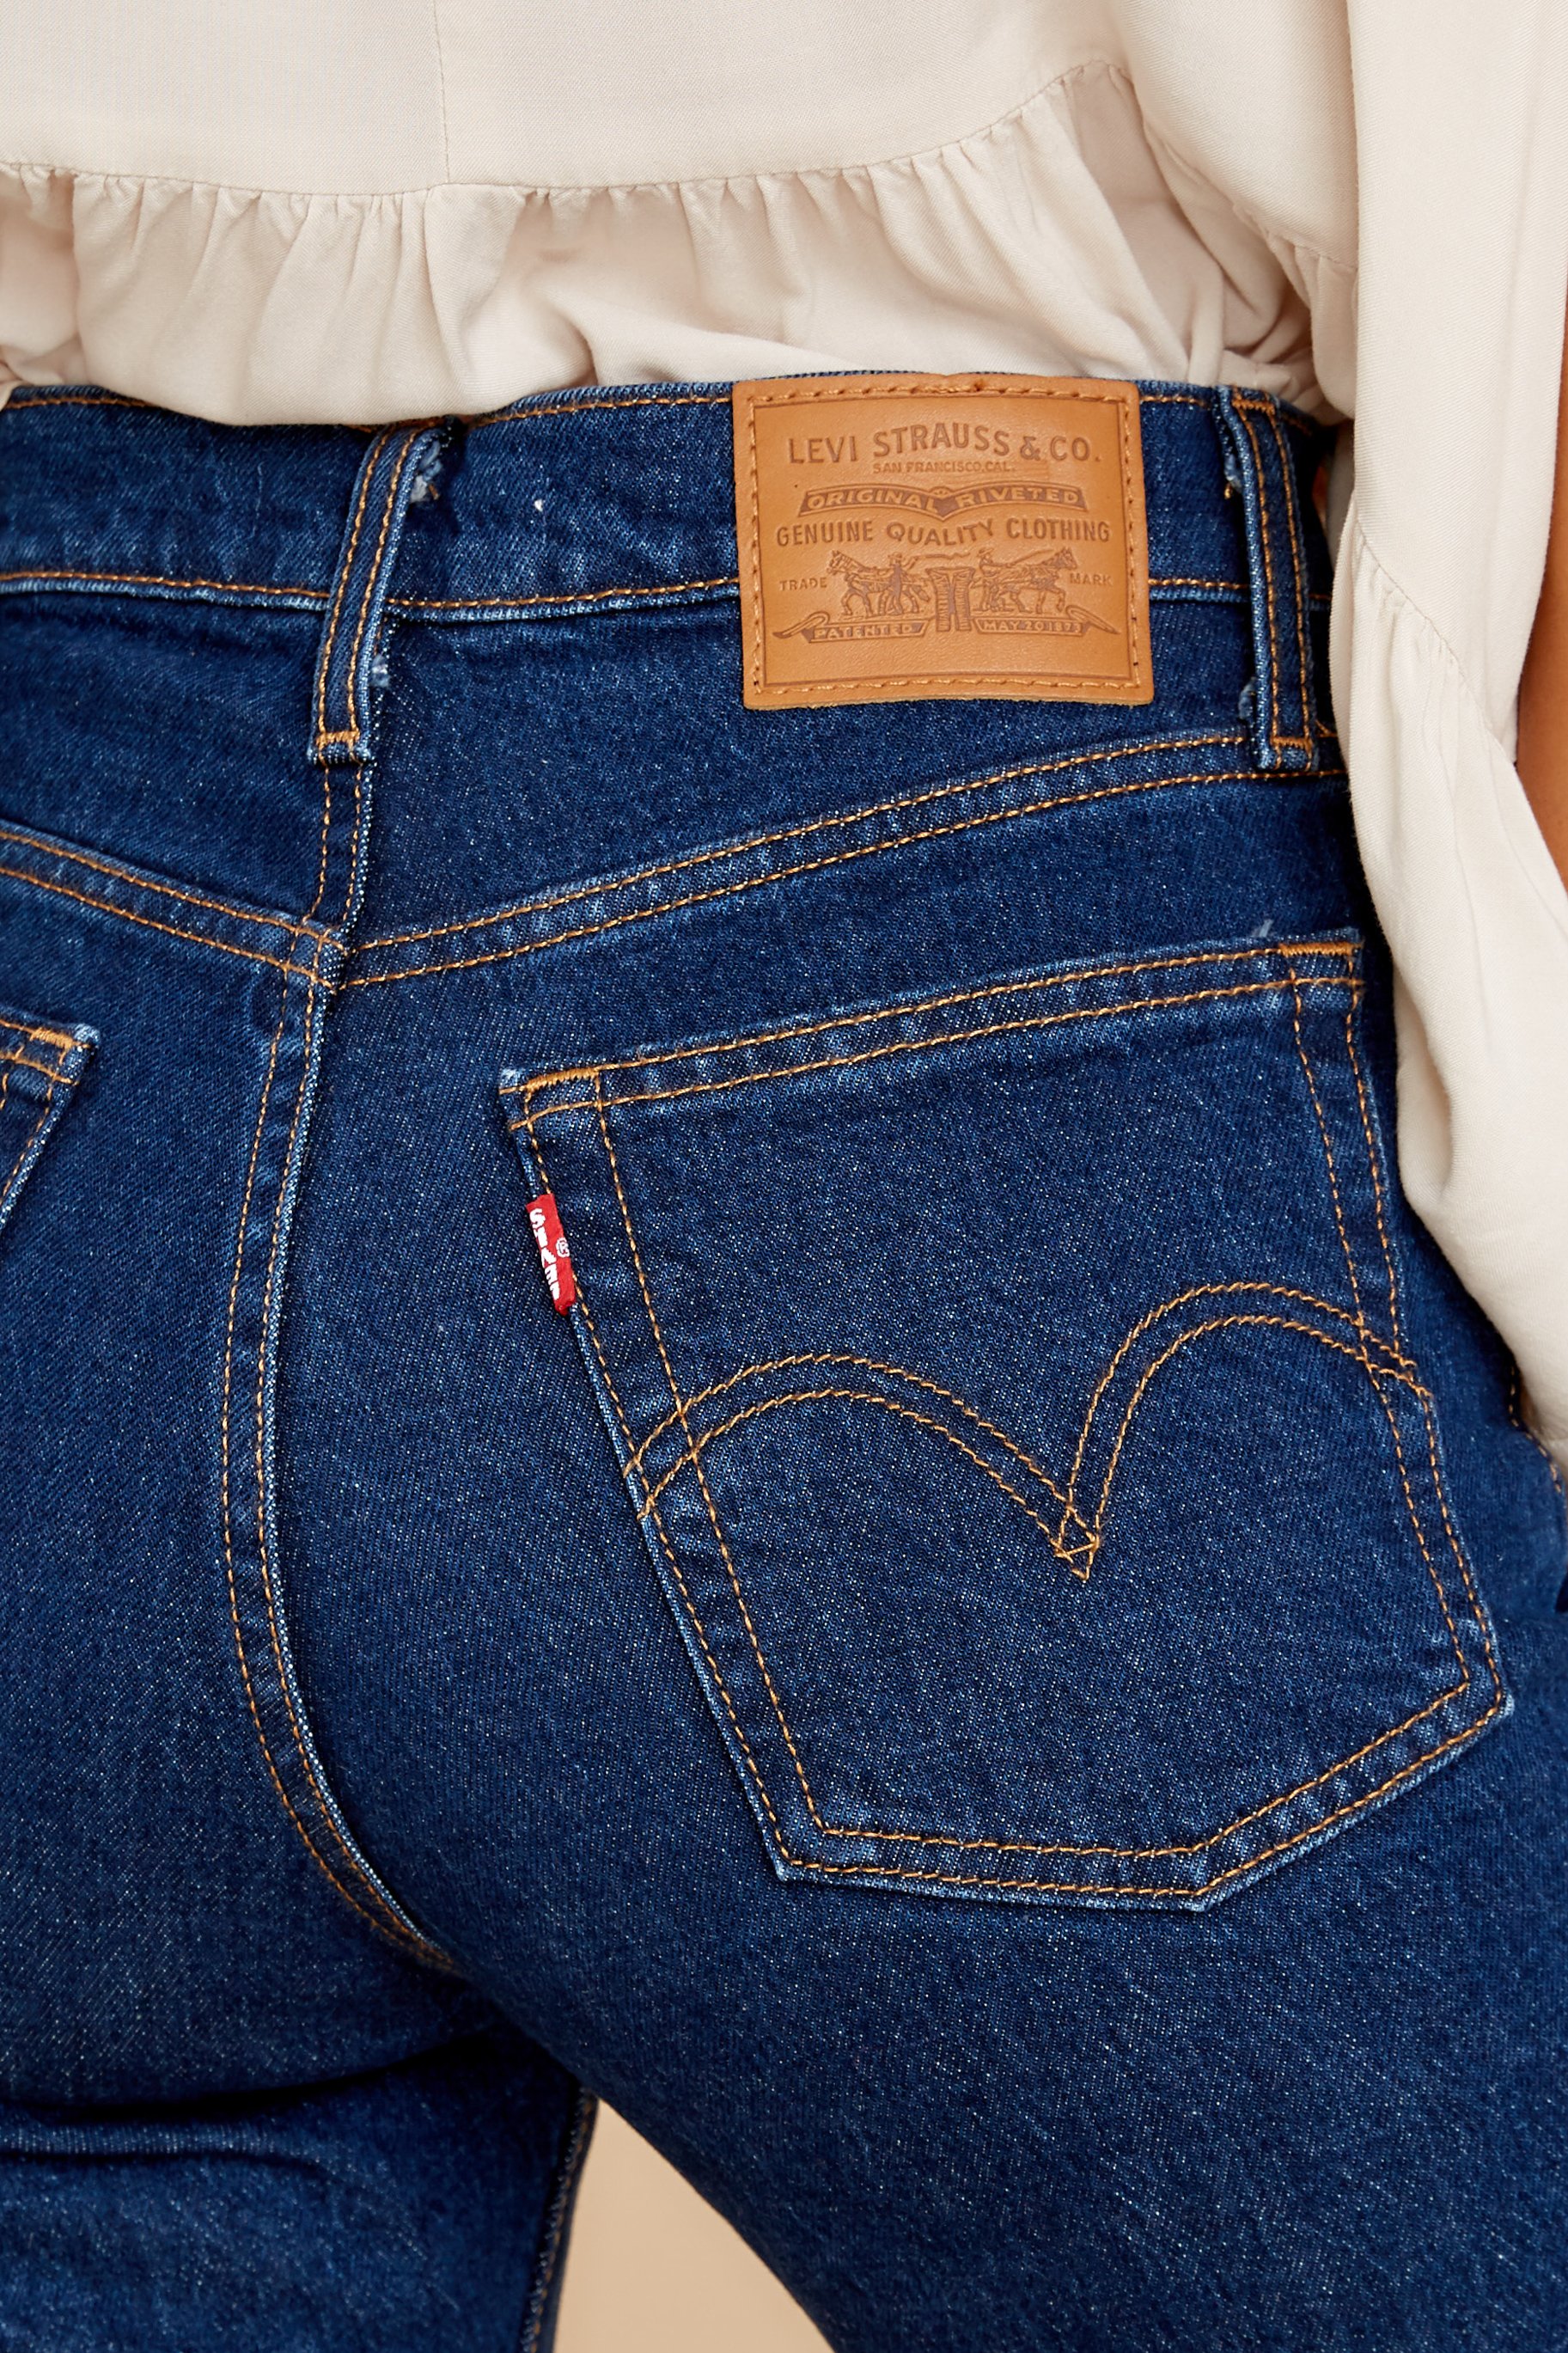 Levi's Wedgie Icon Fit in Life's Work 